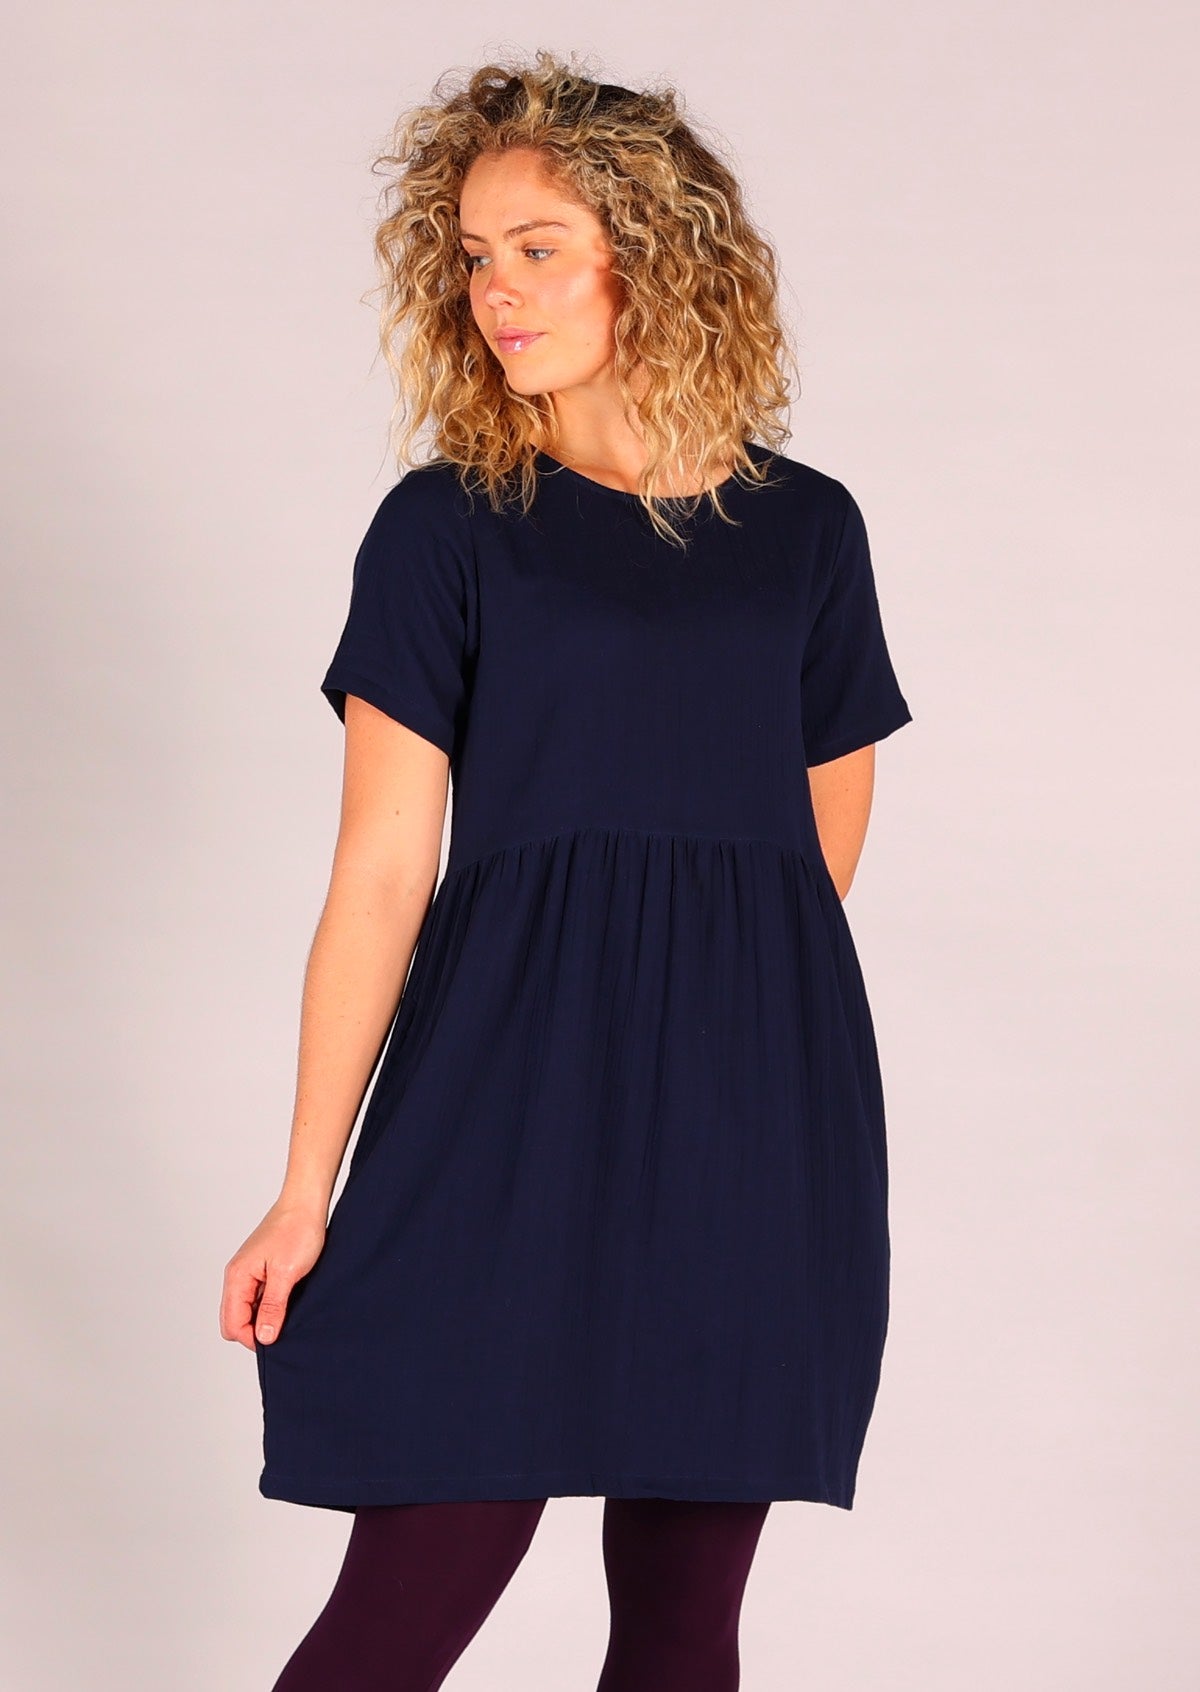 Dark blue double cotton short sleeve dress that sits above the knee